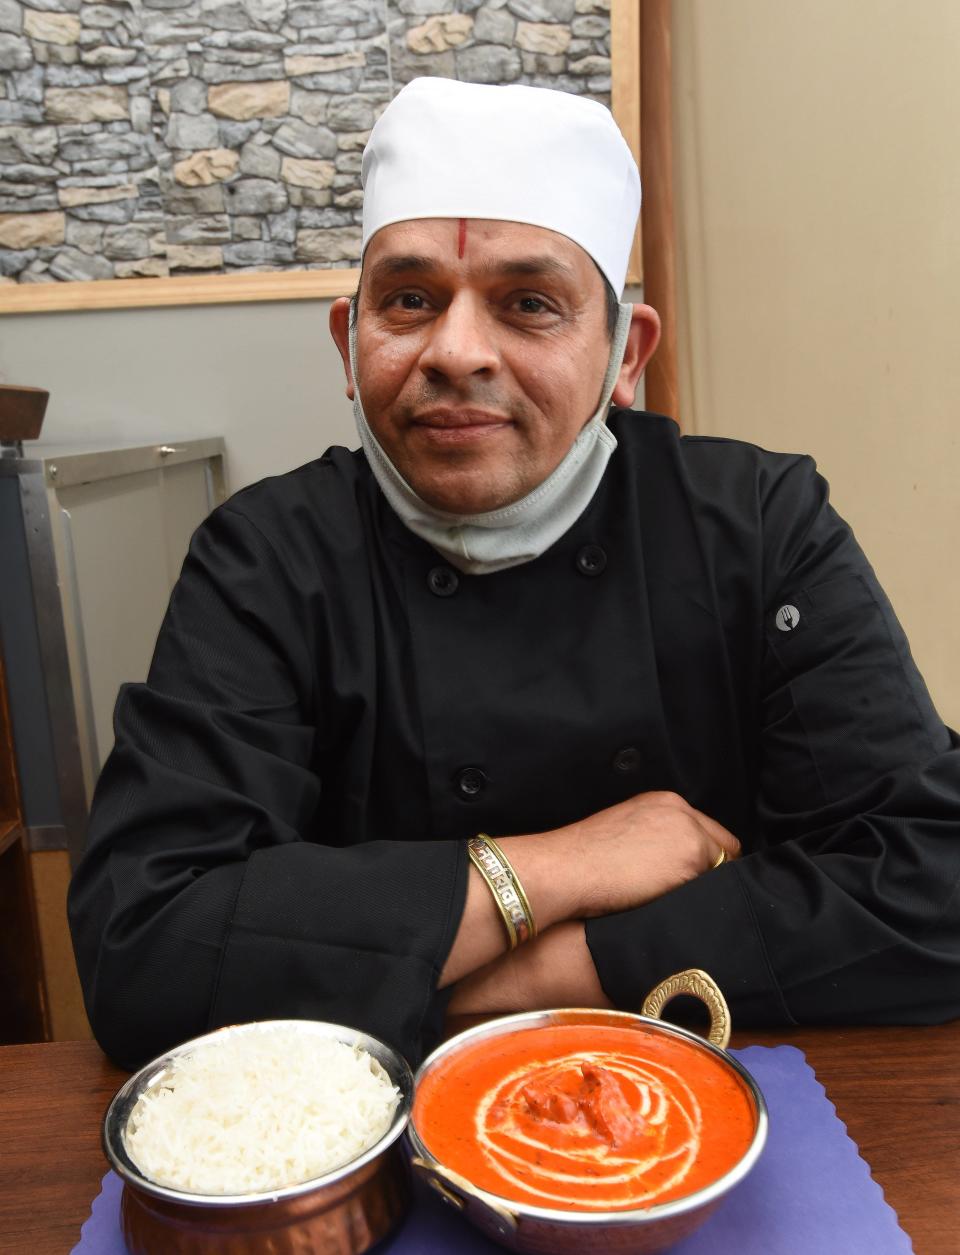 Gunakhar Pandey is the chef at Fine Restaurant and Bar located in the former Nunzi's at 2330 E. 38th St. in Erie.